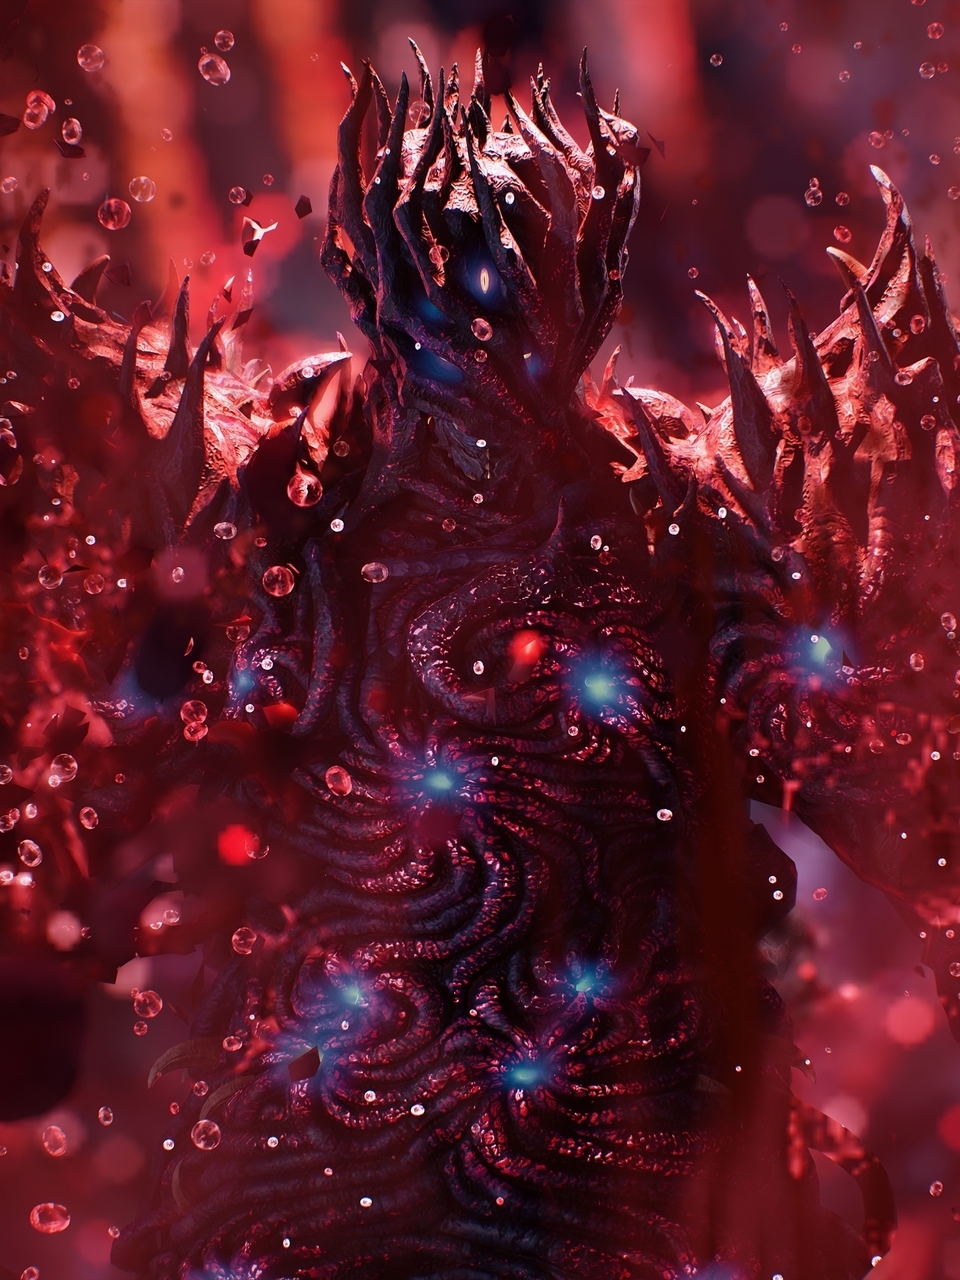 Image: Red, blood, boss, Urizen, appearance, demon, game, Devil May Cry 5